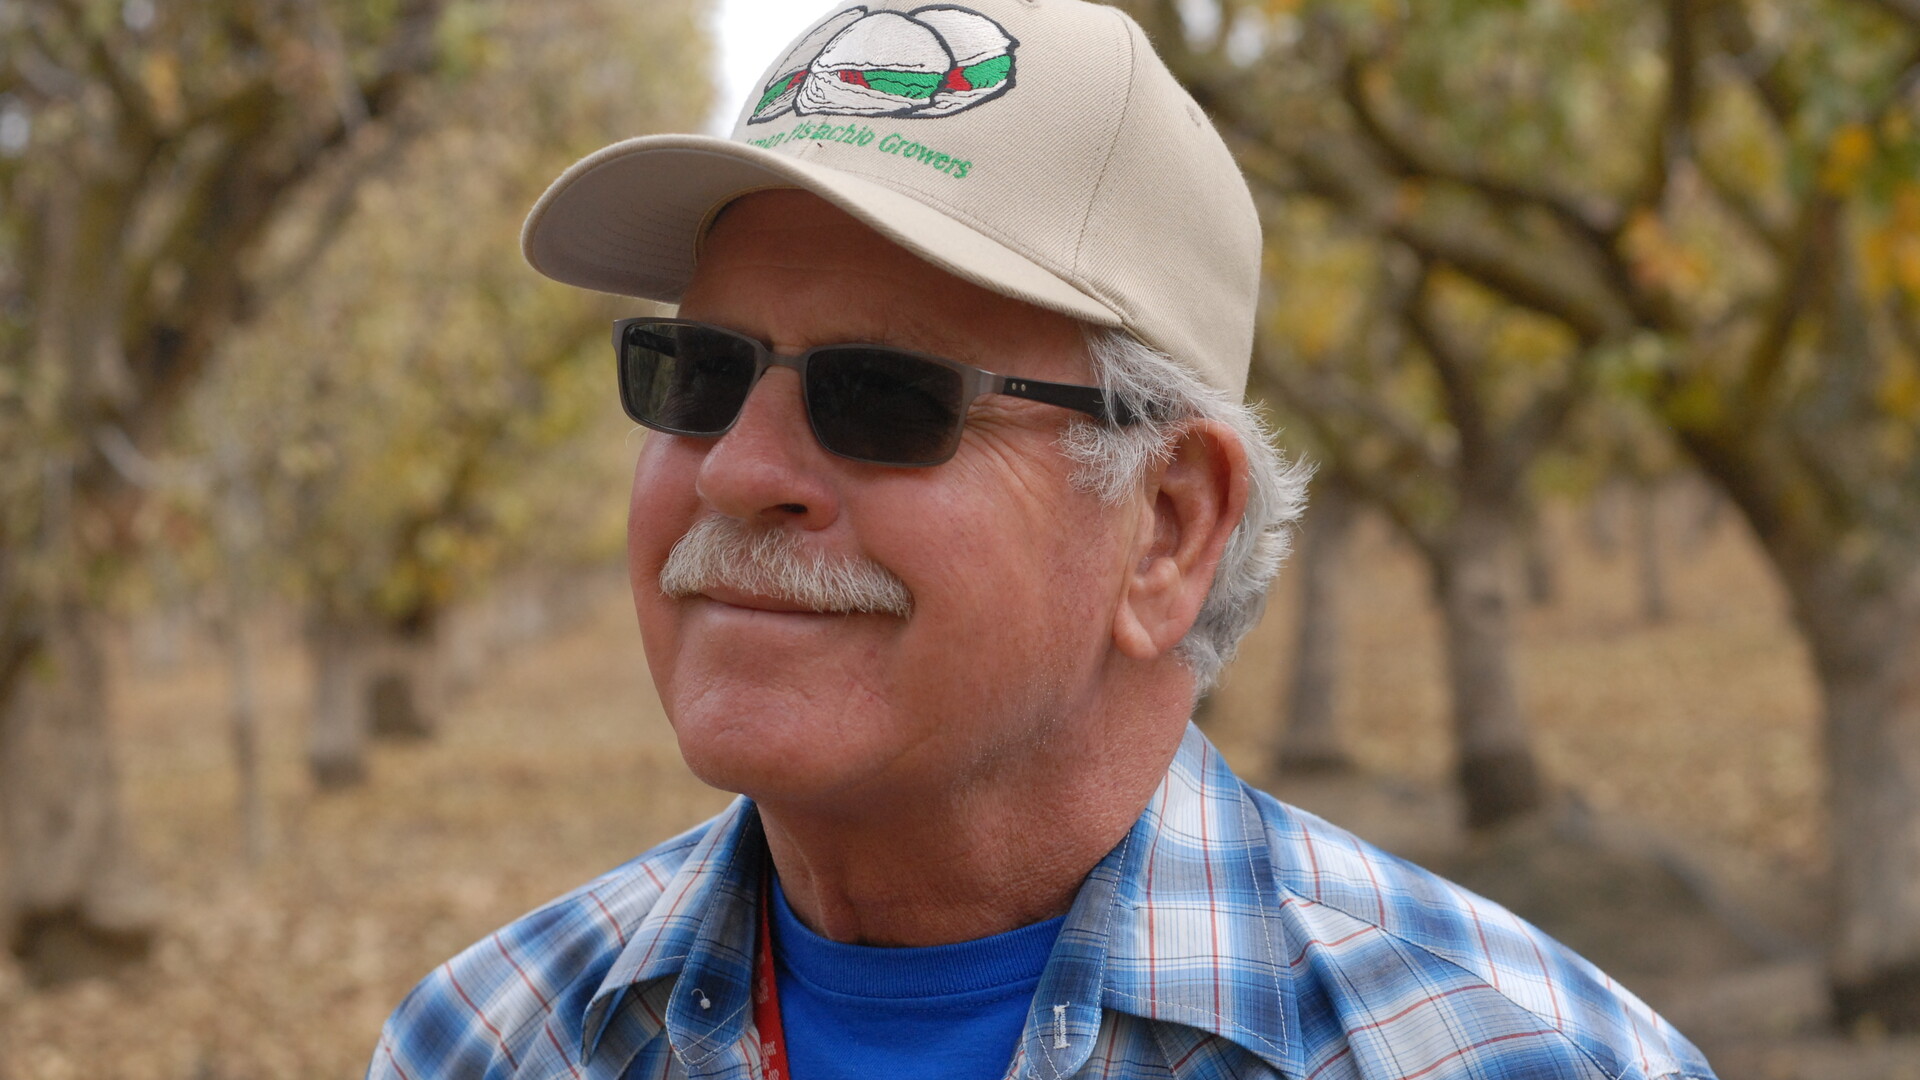 Controlling Soft Scale and Mealybugs in Pistachios